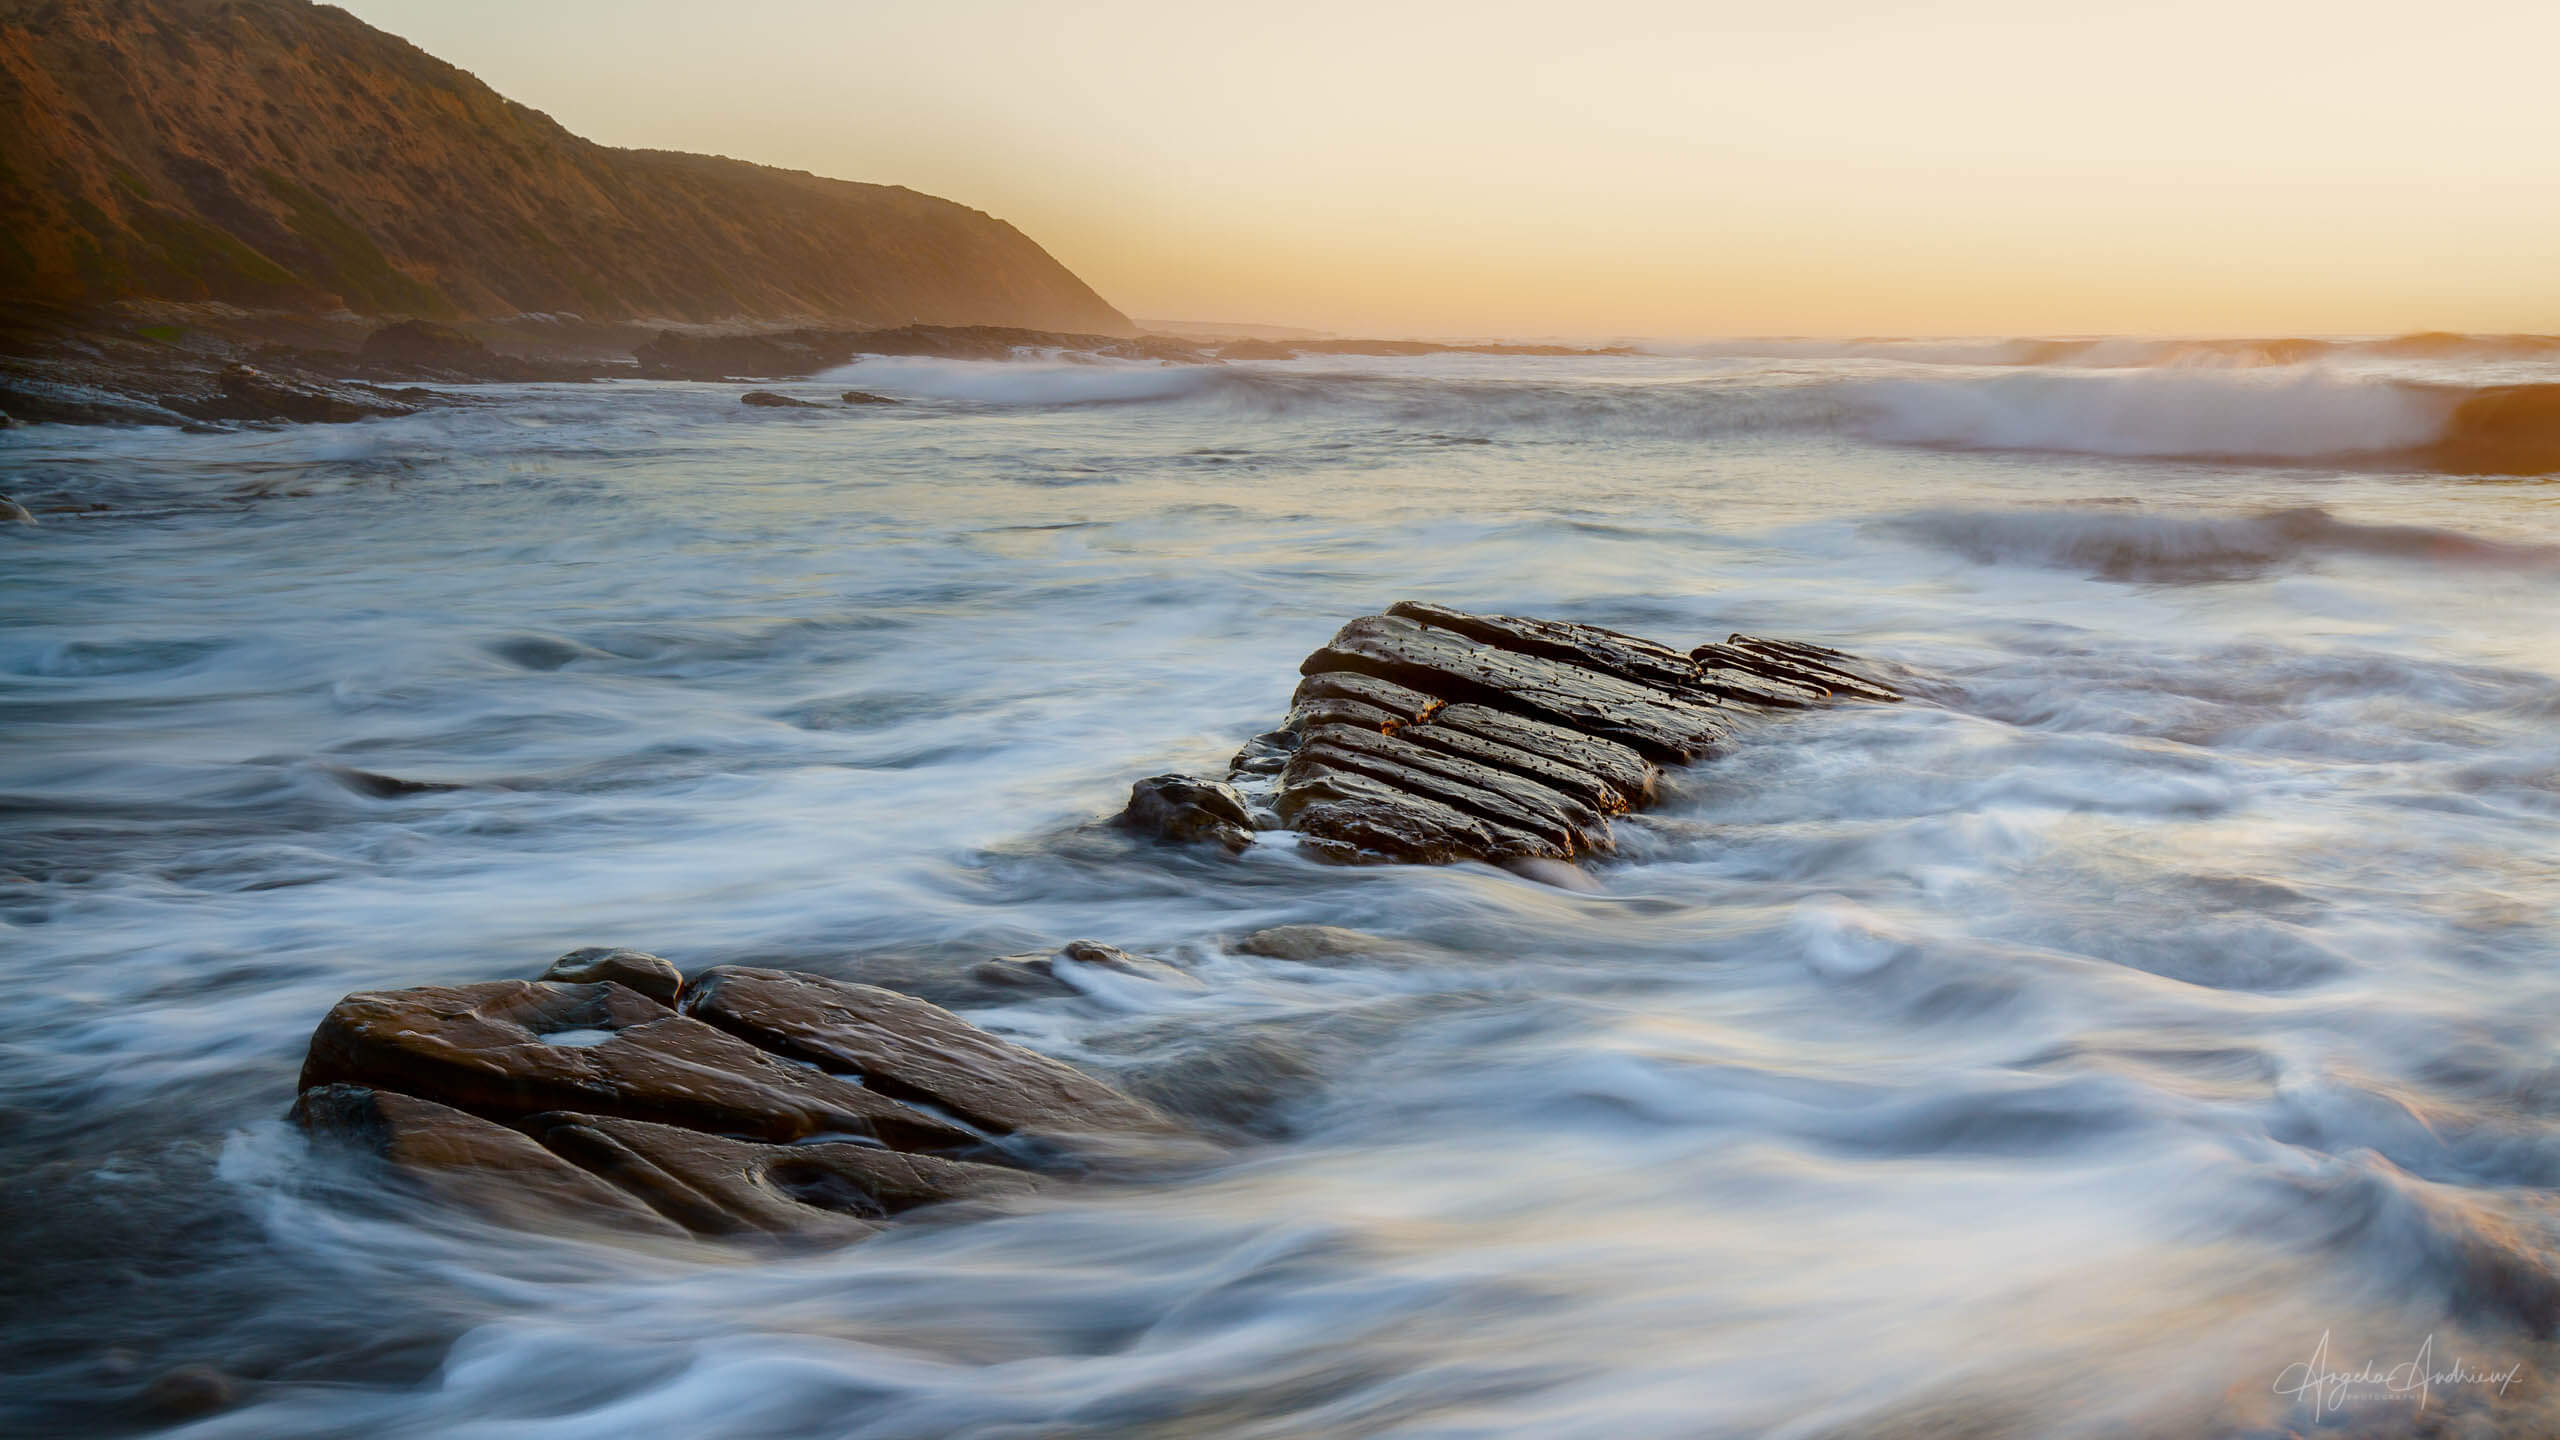 Hero Image for Setting SMART Photography Goals, captured at Montana de Oro at sunset